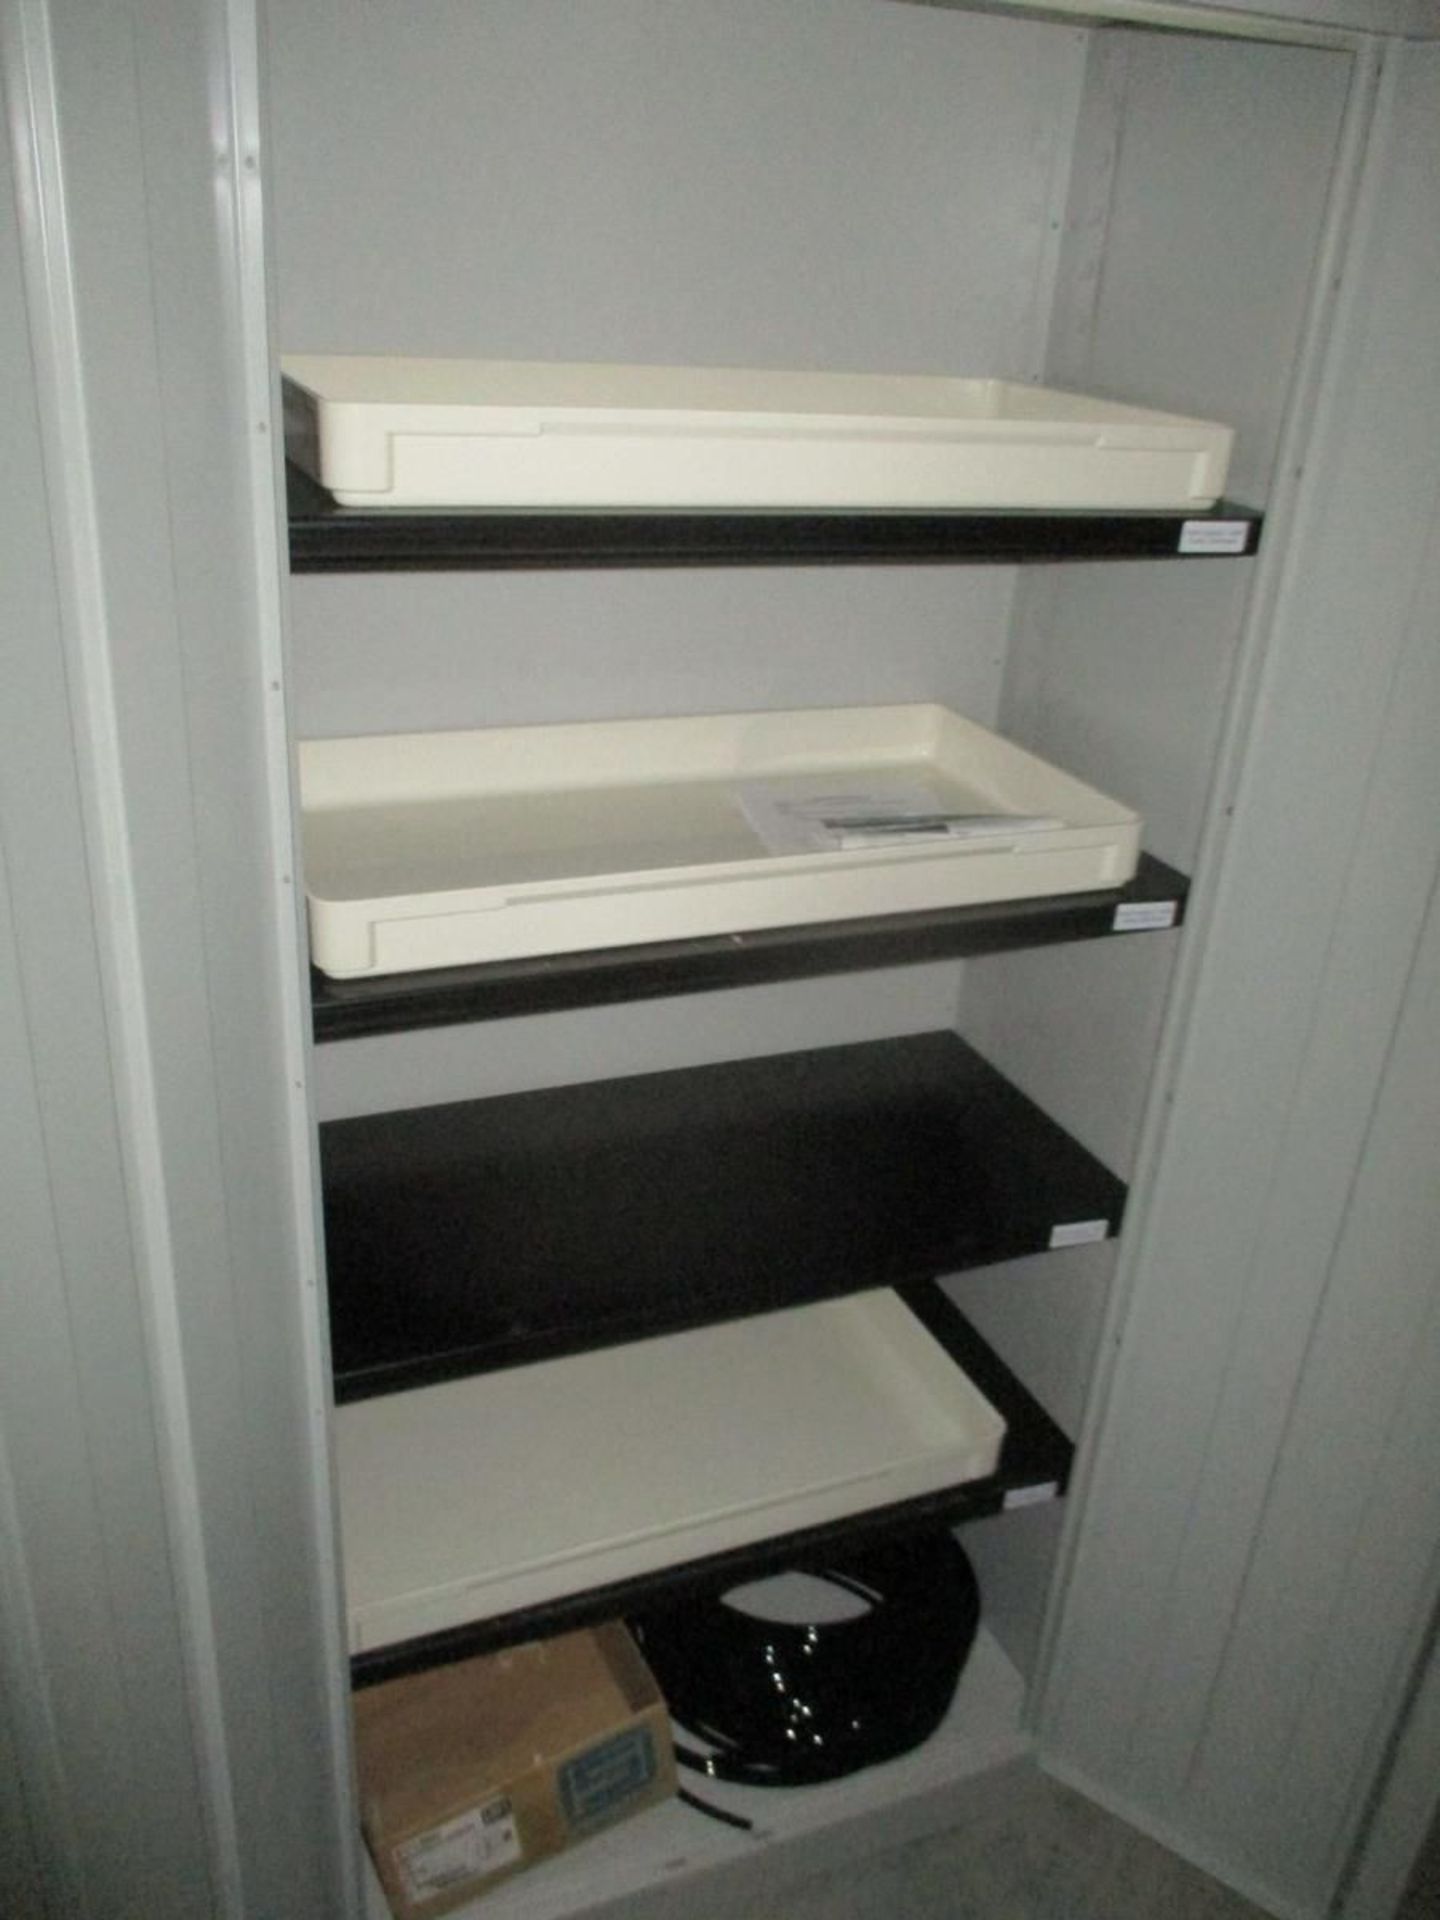 36"" W x 18"" D x 78"" H Steel Storage Cabinets - Image 7 of 8